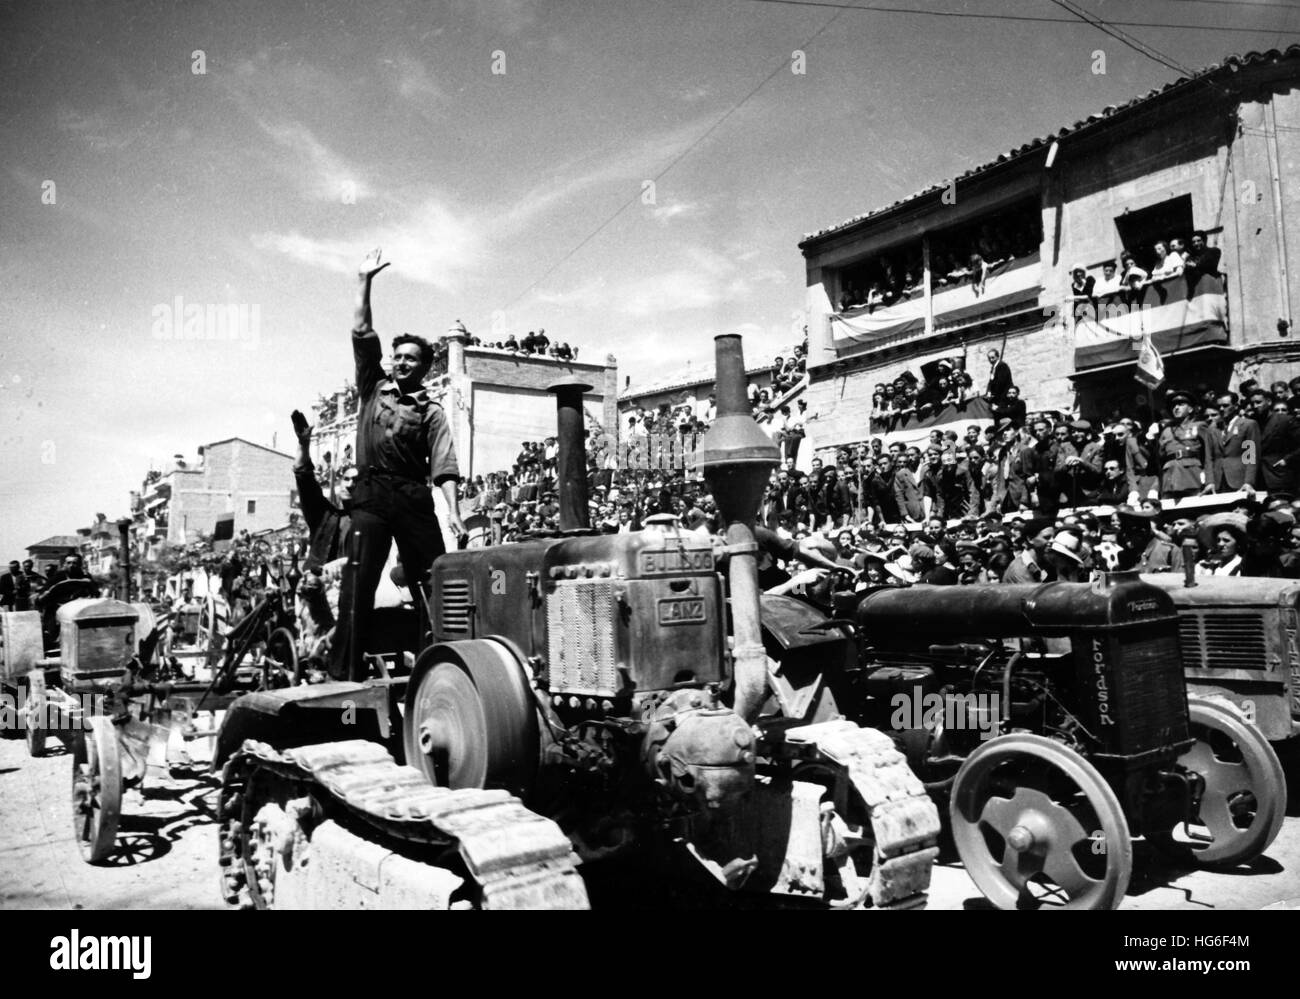 The Nazi propaganda picture shows farmers standing on tractors in front of Spanish dictator Franco during a parade on the occasion of an inauguration of a dam on the Aragón river in Spain, June 1942. Fotoarchiv für Zeitgeschichtee - NO WIRE SERVICE - | usage worldwide Stock Photo